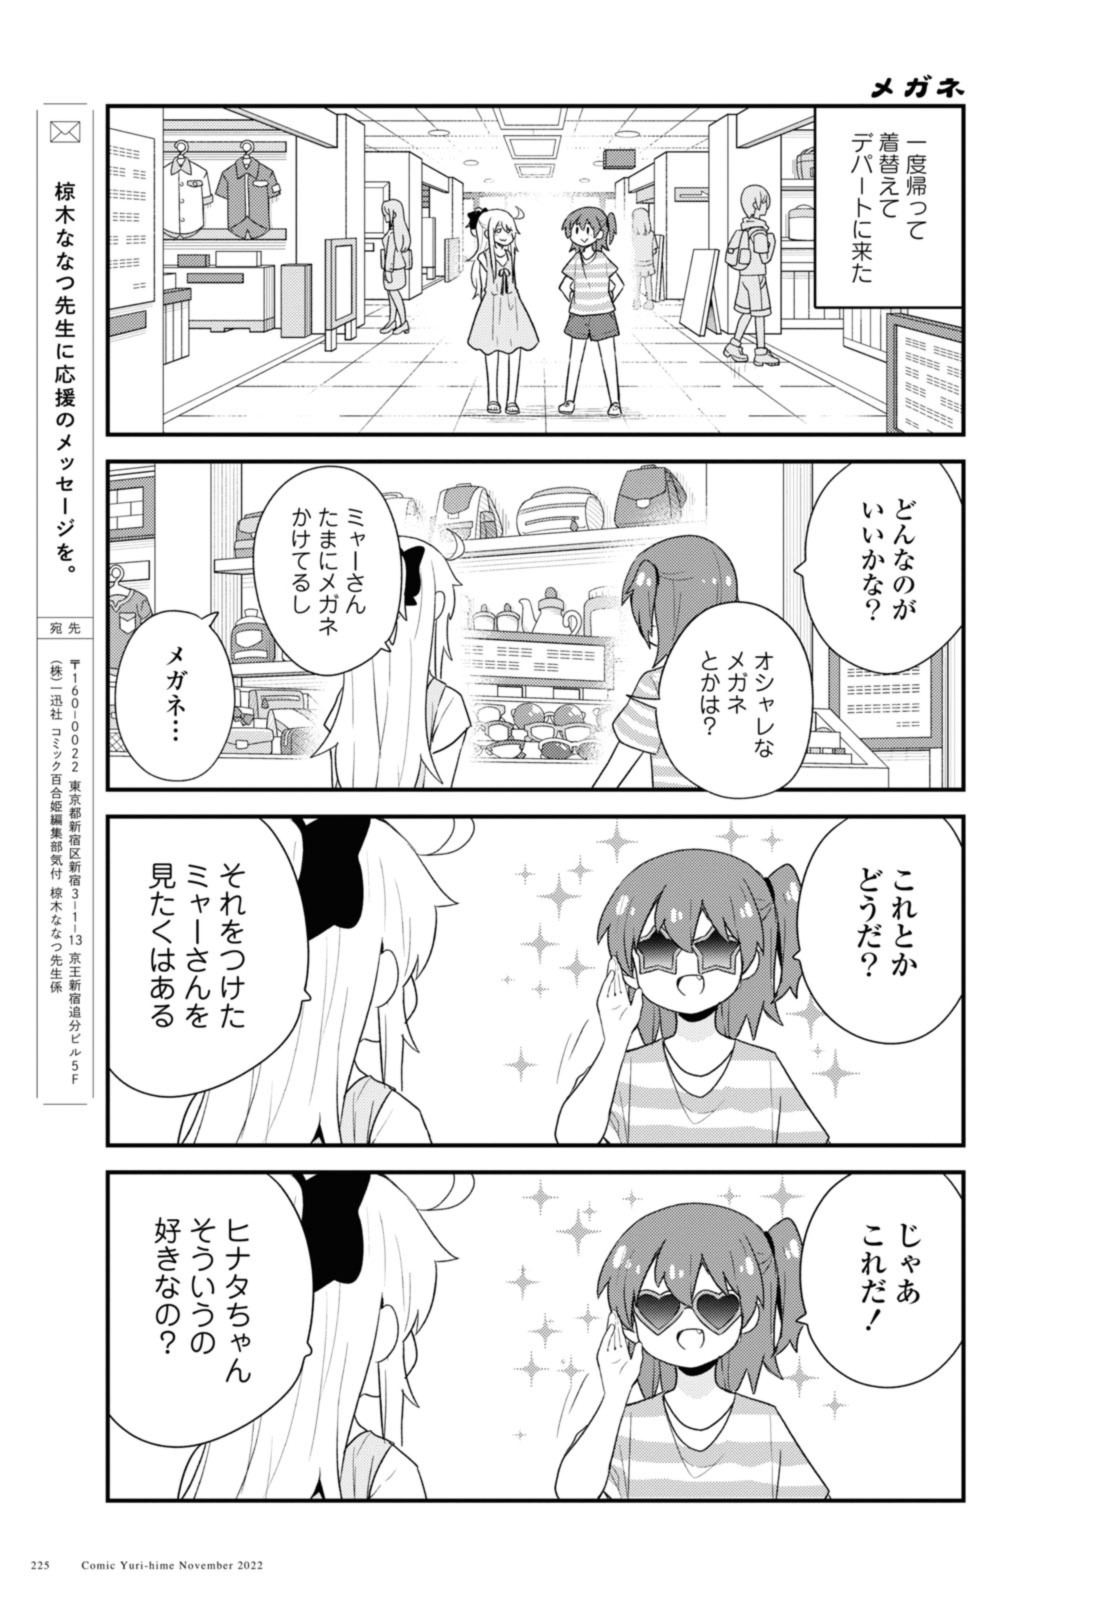 Wataten! An Angel Flew Down to Me 私に天使が舞い降りた！ 第99話 - Page 13